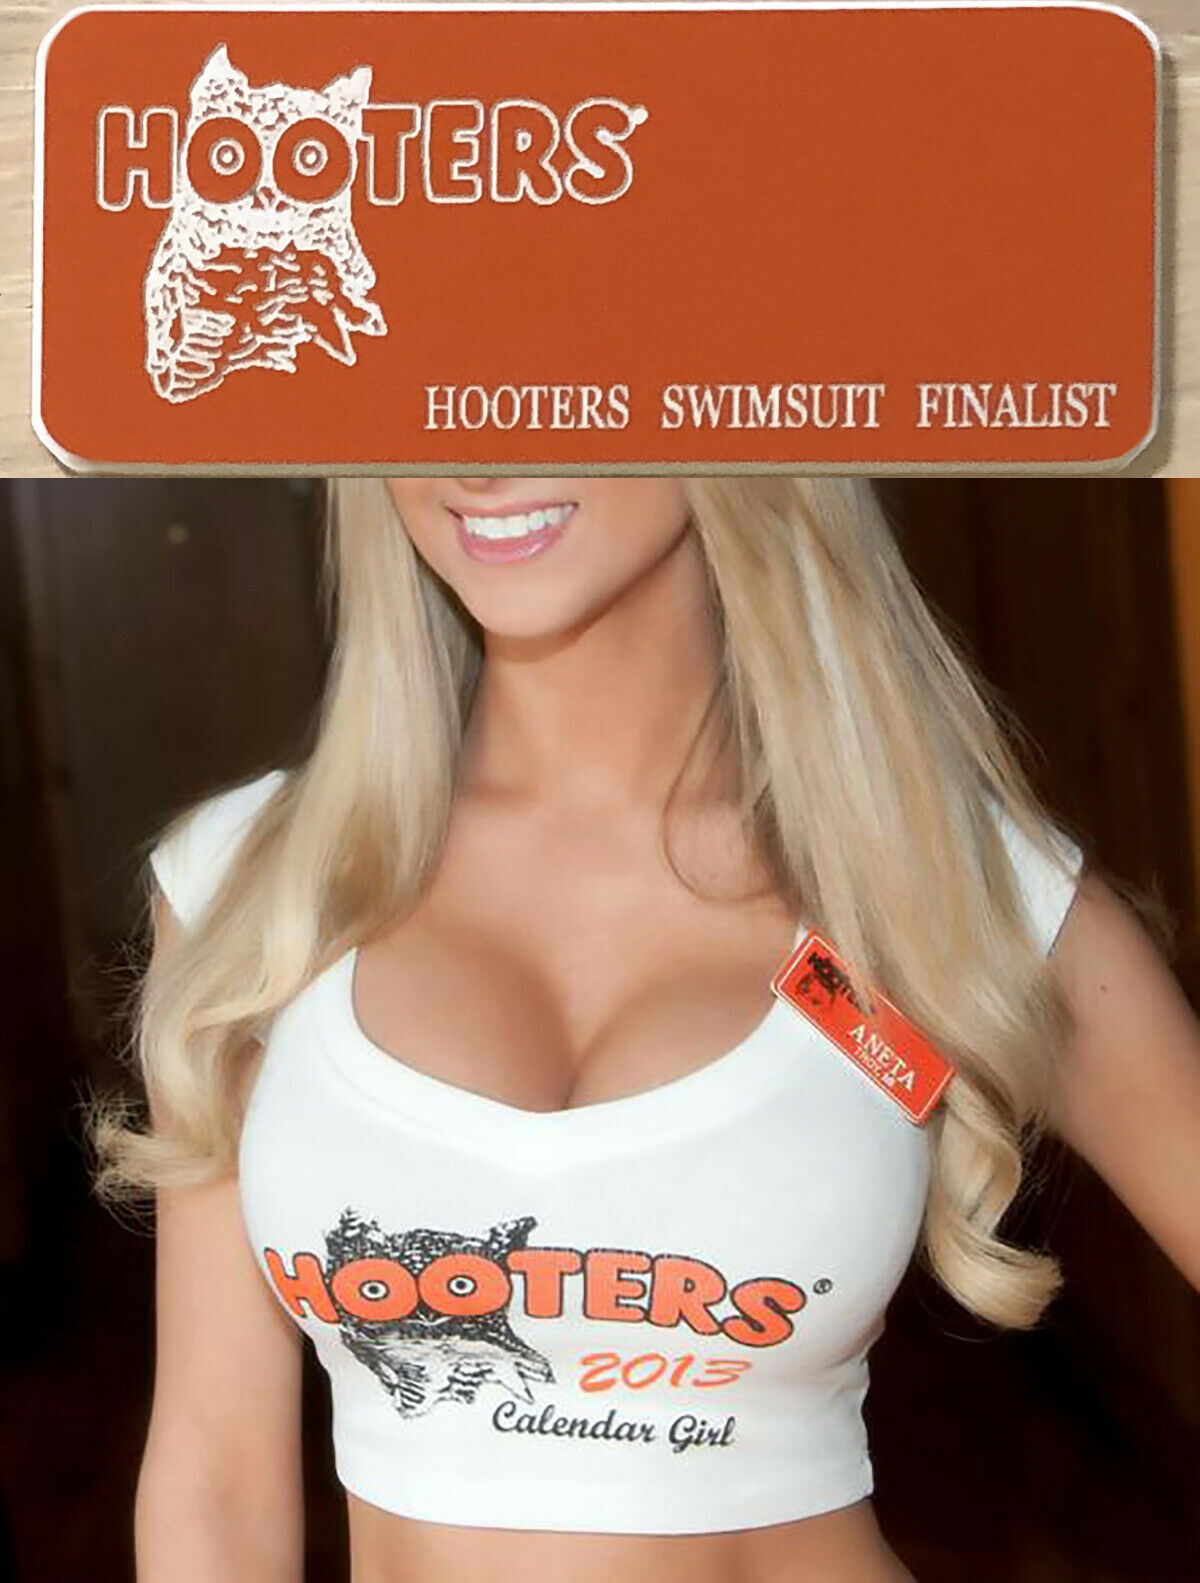 Hooters Girl Pin Engrave Personalize Customize Your Name Tag Swimsuit Finalist